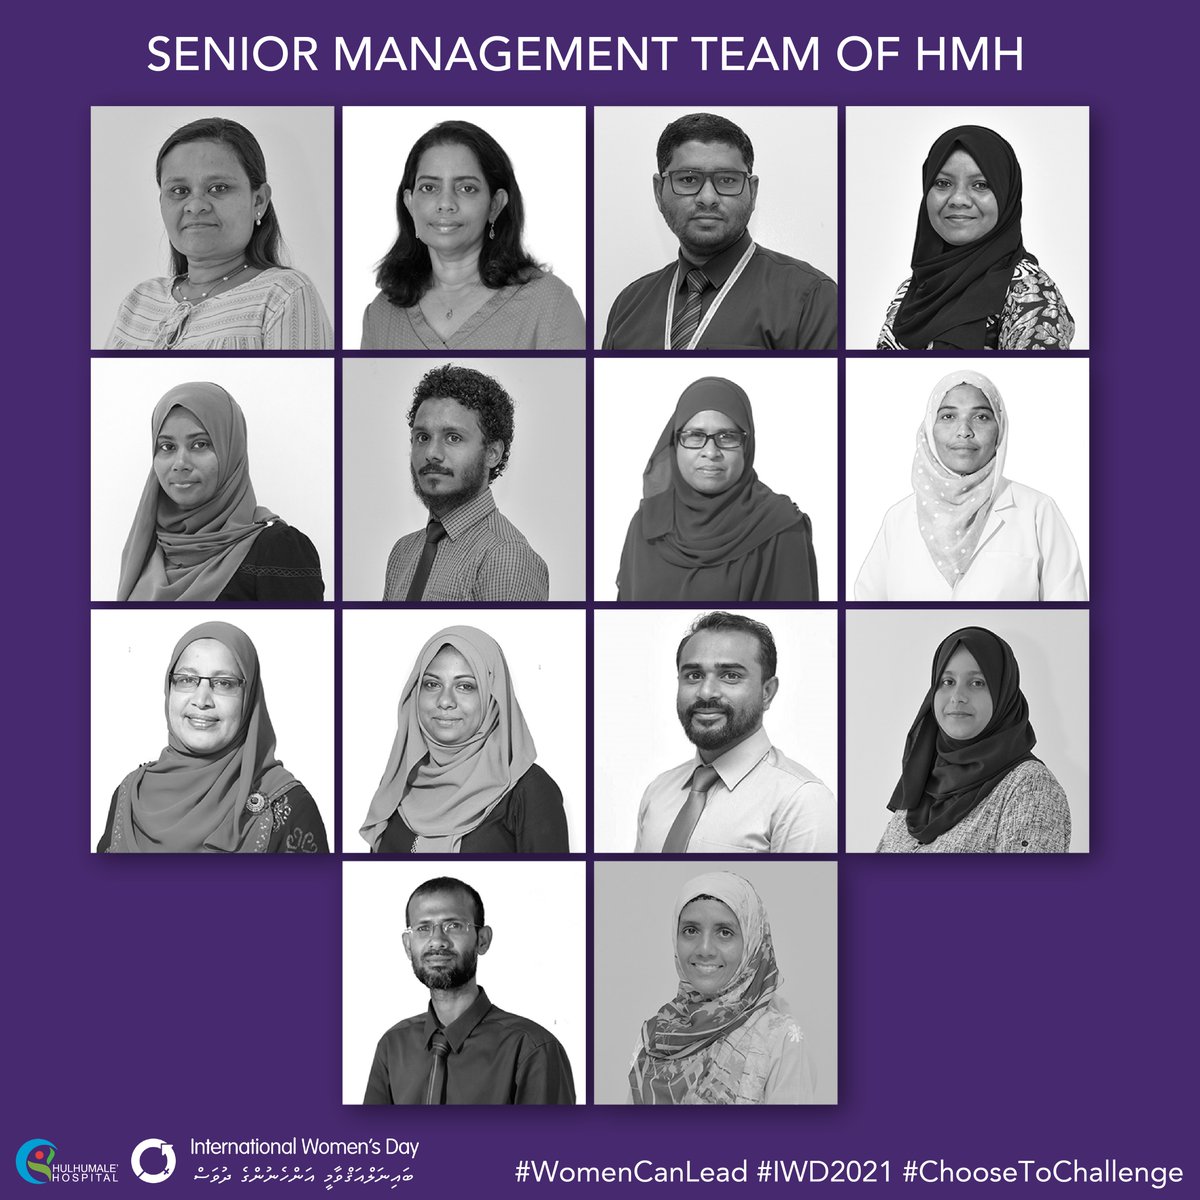 HMH is an exemplary organization of women in leadership. #Challenging the traditional norms. #WomenCanLead

#GenerationEquality #EmpowerWomen #ChooseToChallenge2021 #IWD2021 #WomensDay